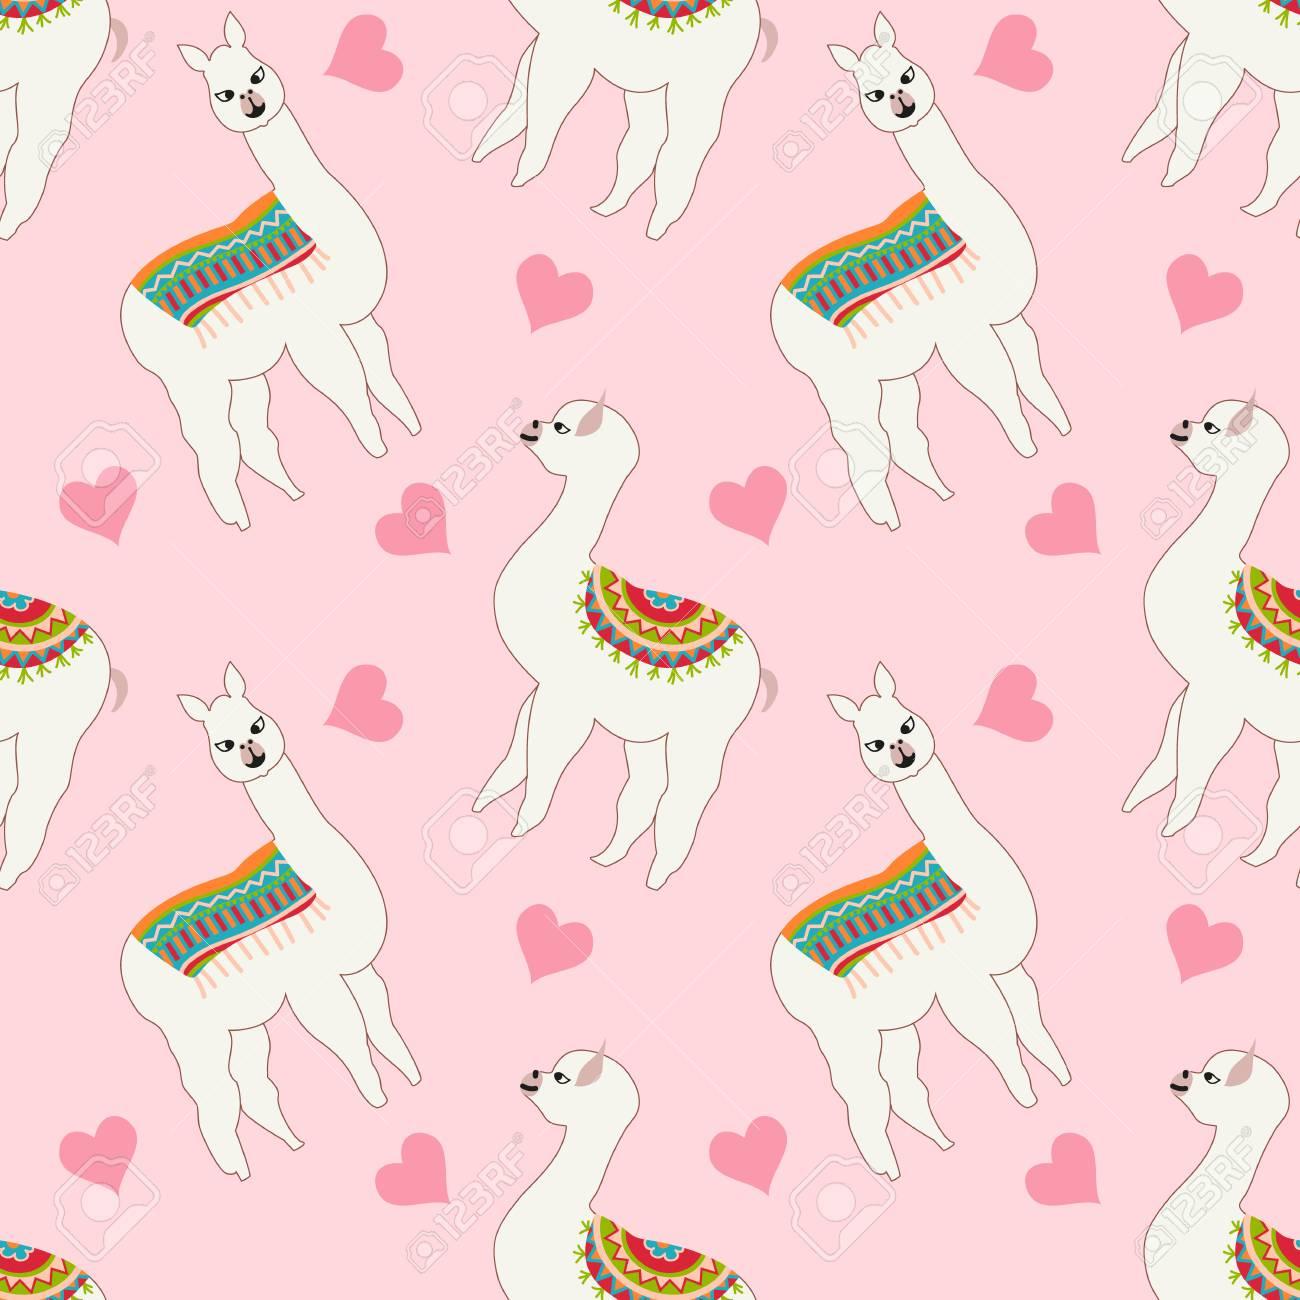 Free download Seamless Pattern With Cute Llama And Heart